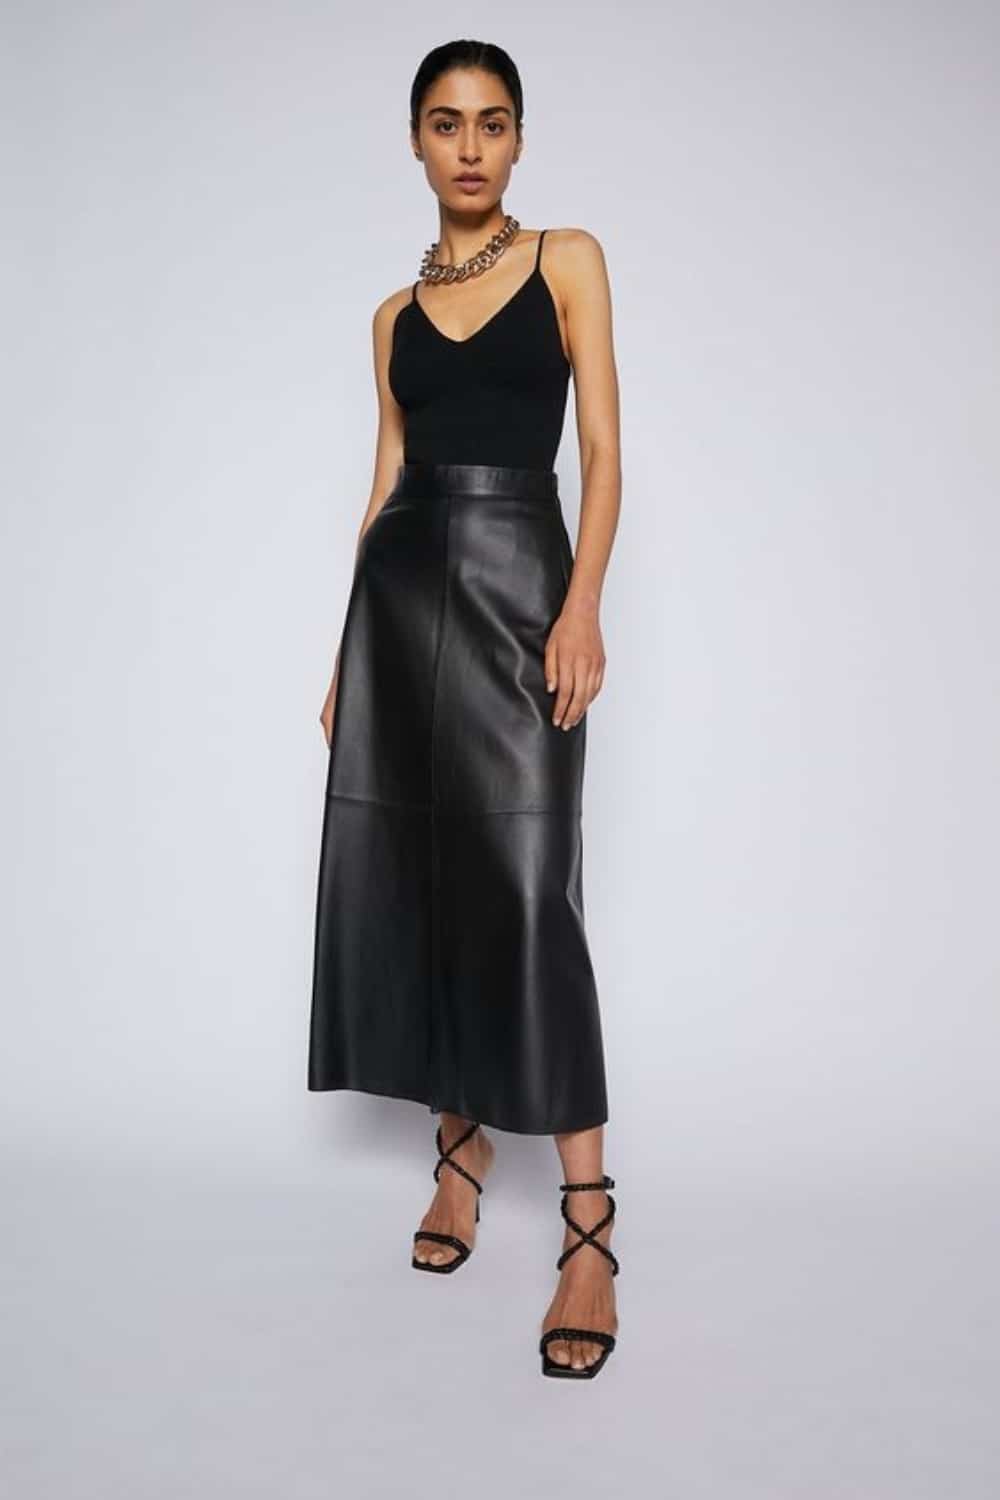 Bar Outfit for ladies - Camisole Leather Skirt